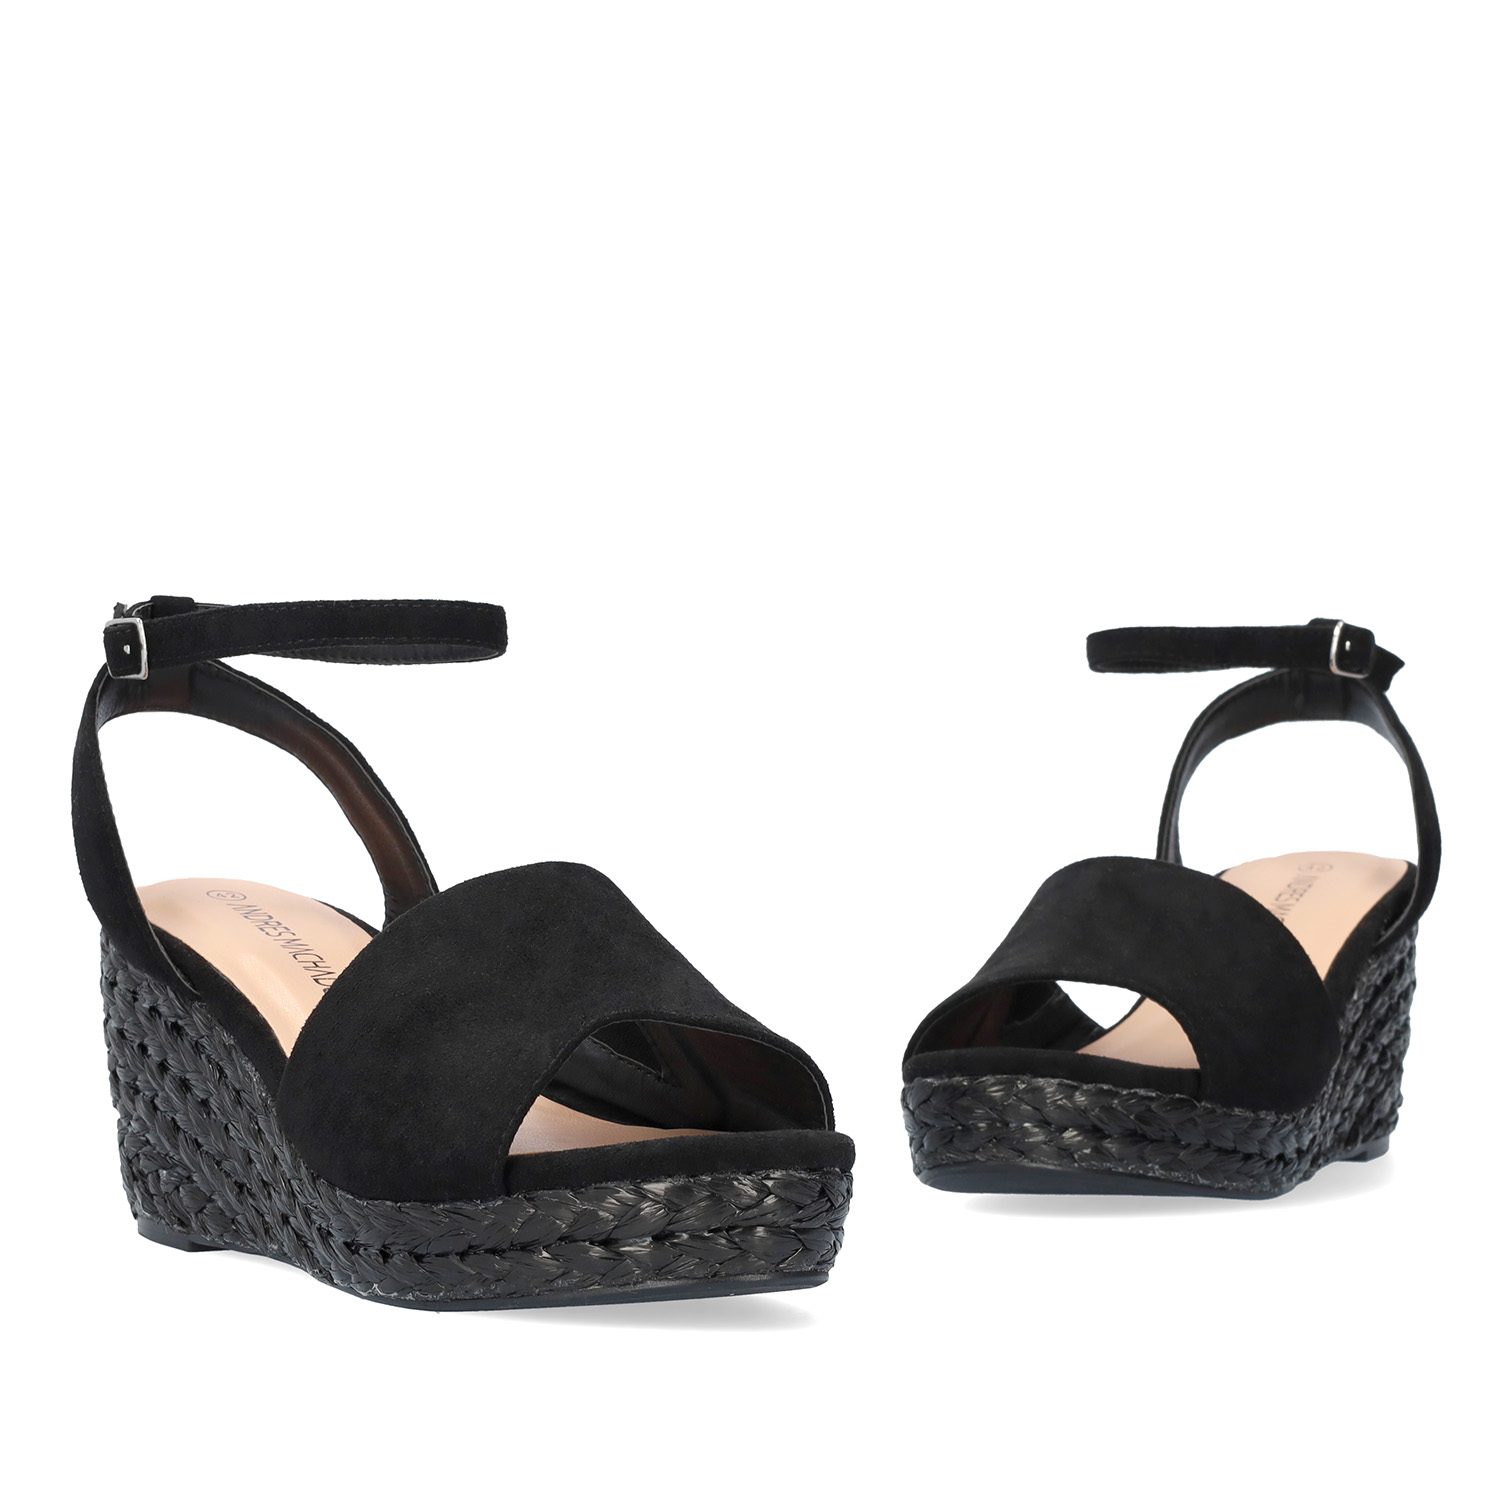 Black faux suede sandal with a jute wedge 